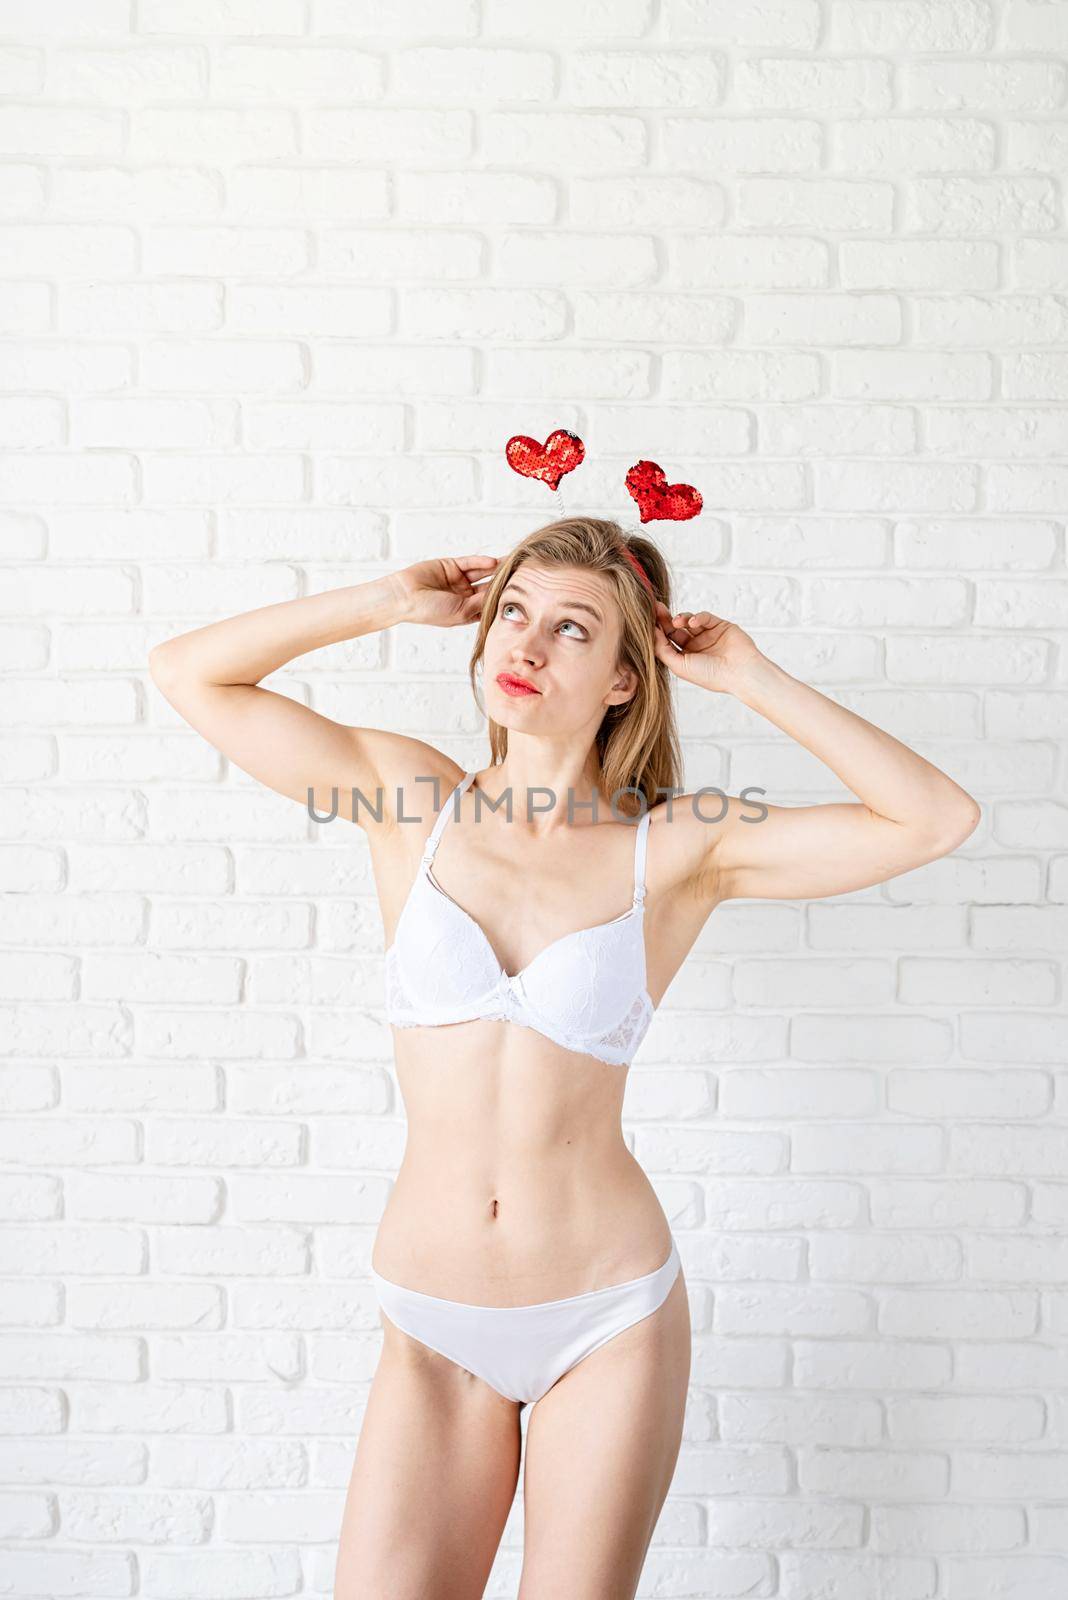 Slim sexy young woman in white underwear wearing heart shaped headband on white brick wall background by Desperada